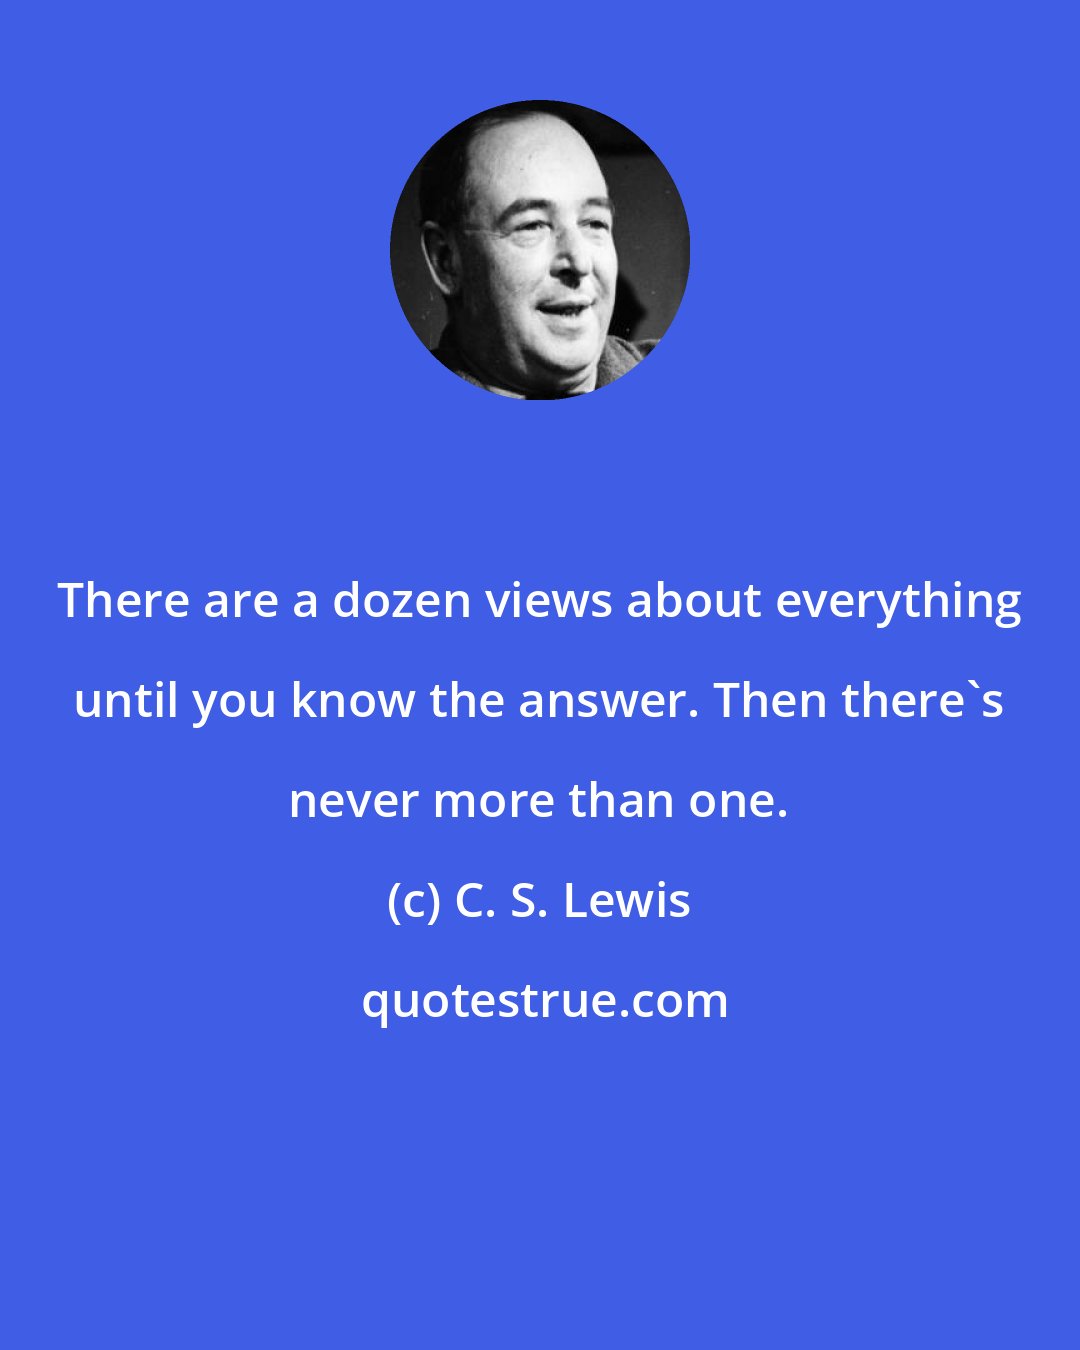 C. S. Lewis: There are a dozen views about everything until you know the answer. Then there's never more than one.